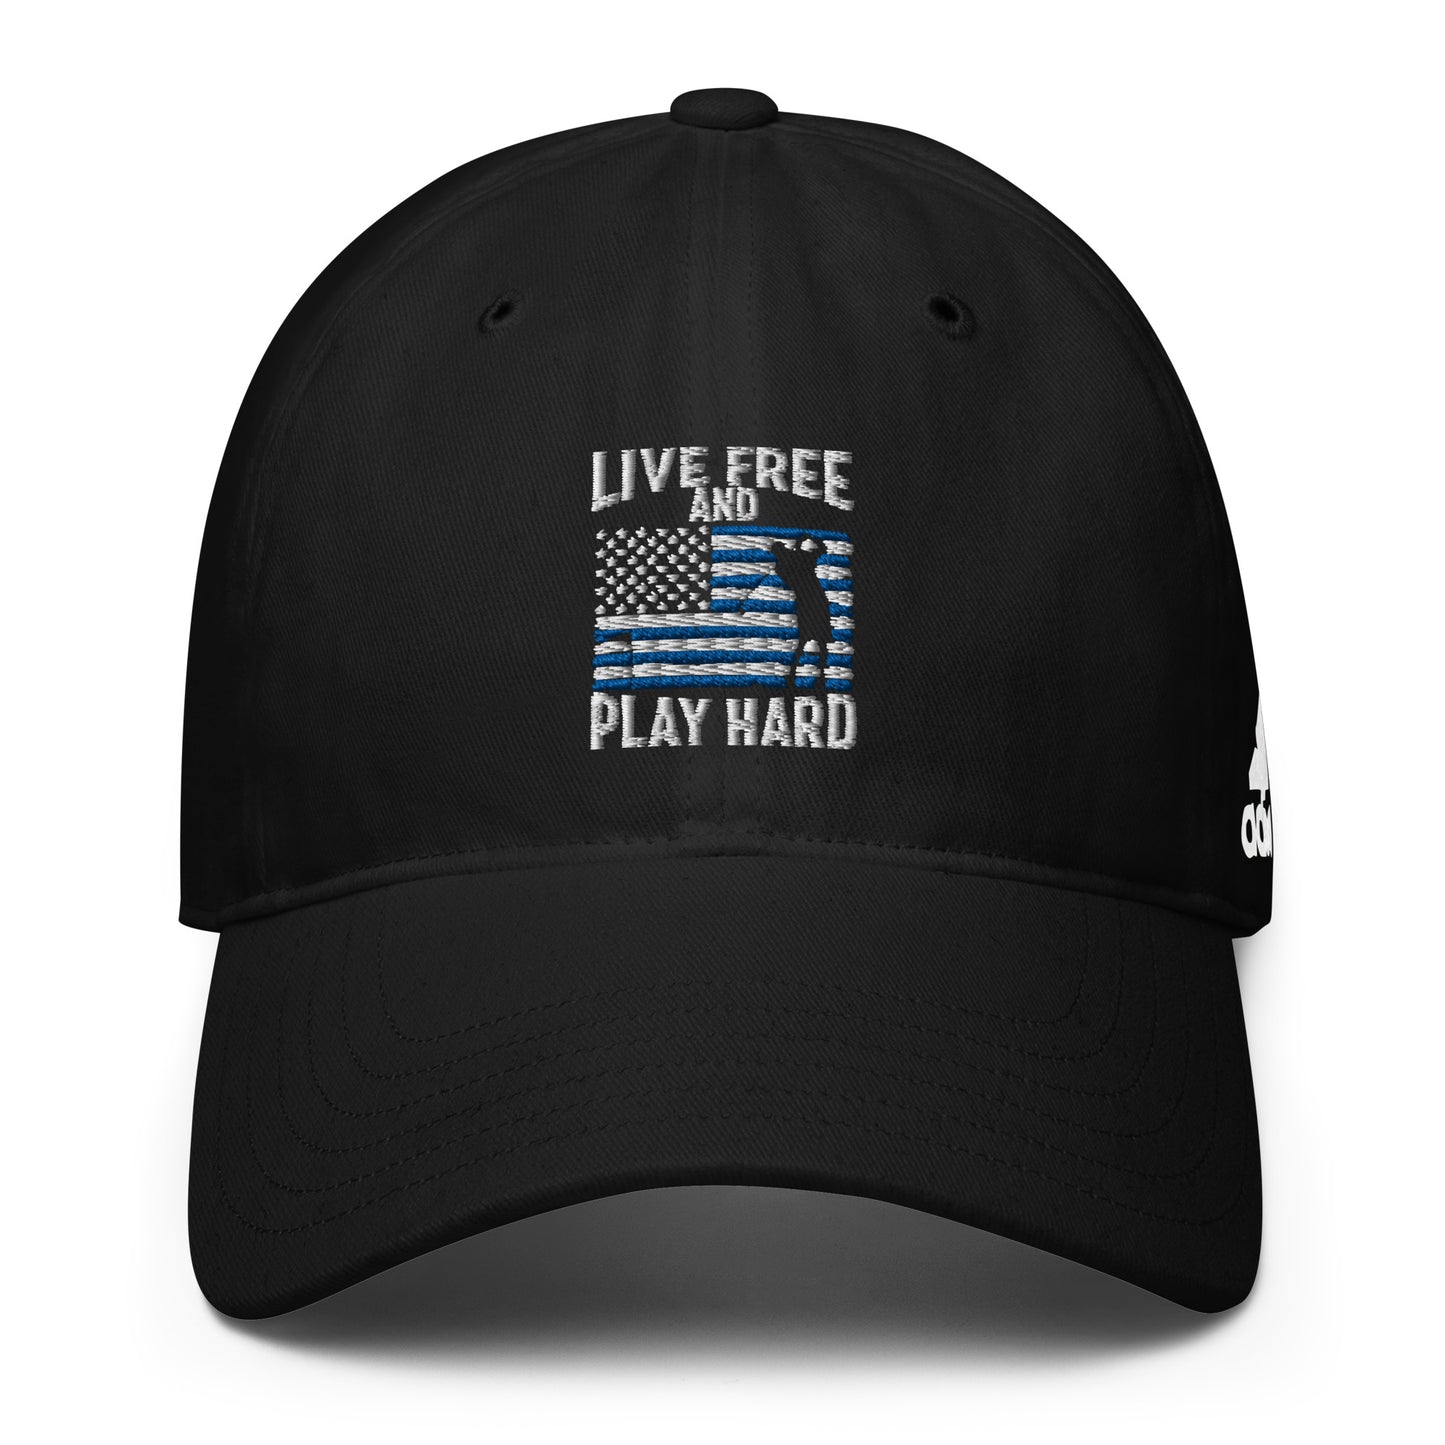 Adidas 'Live Free and Play Hard' Performance Golf Cap (Police Appreciation)